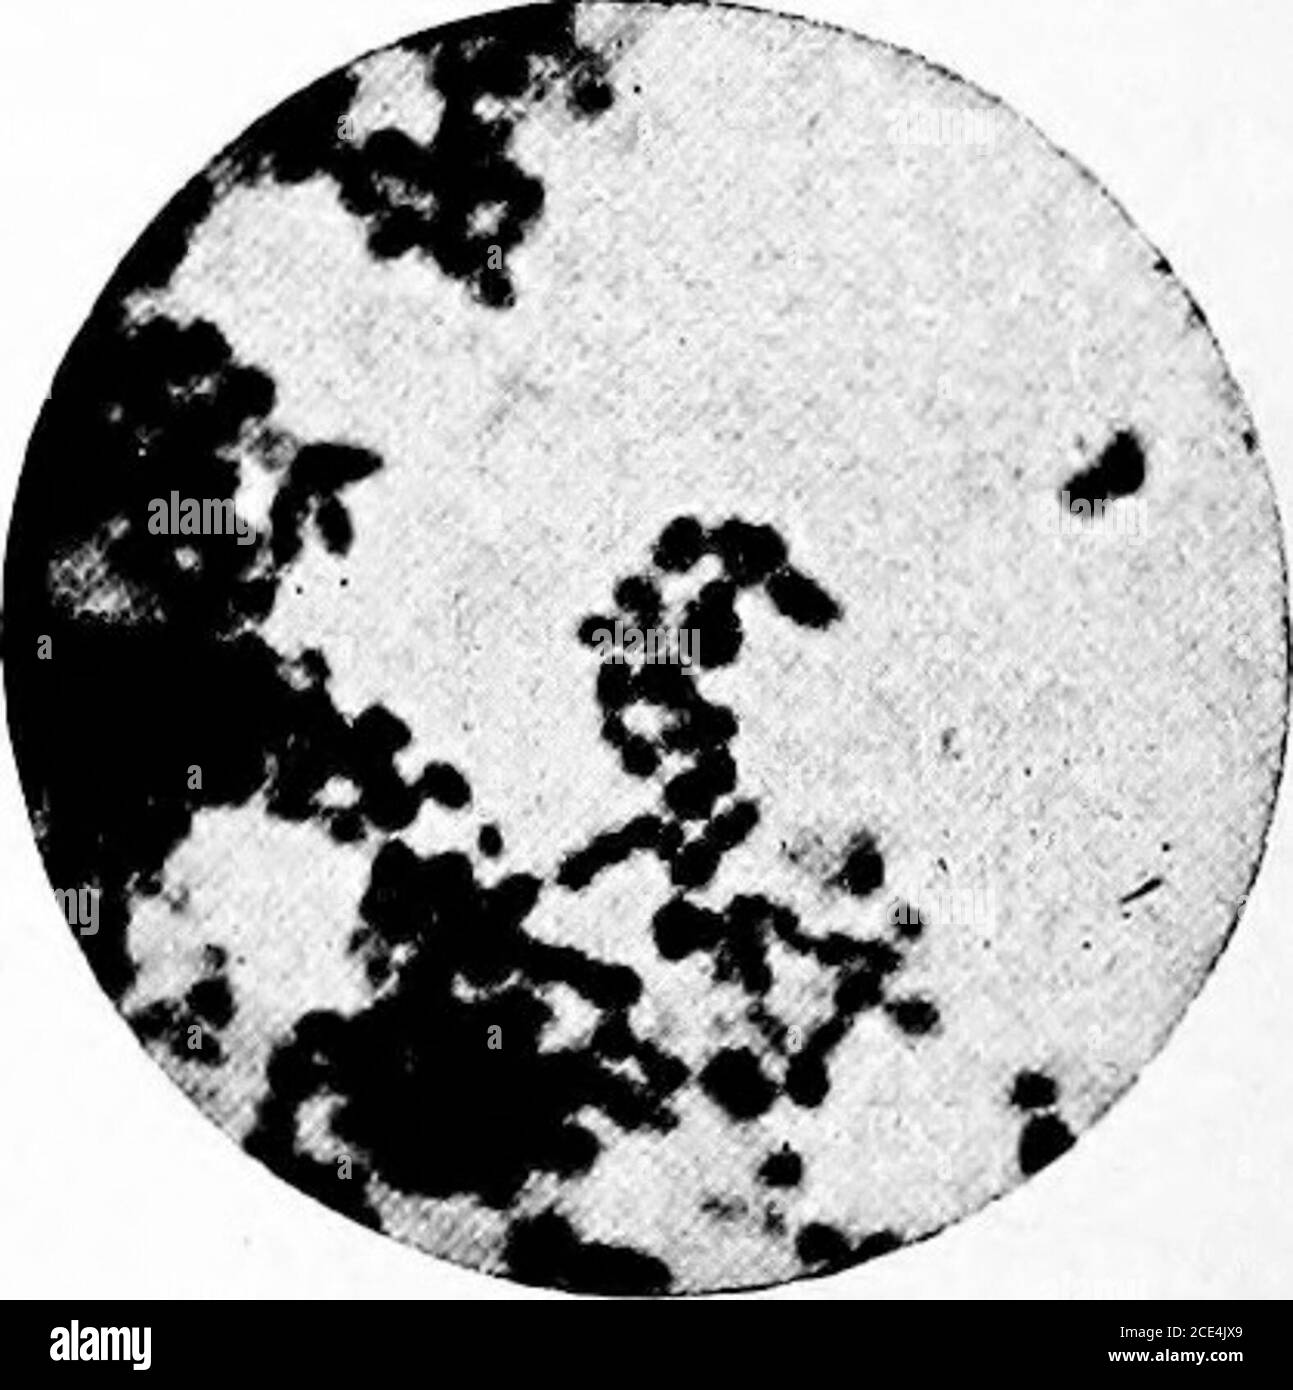 . Pathogenic microörganisms; a practical manual for students, physicians, and health officers . Fig. 118.—B. diphtherise. Forty-eighthours agar culture. Thick, Indian-clubbed rods and moderate number ofsegments. One year on artificial culturemedia. X 1410 diameters.. Fig. 120.—B. diphtherise. Twenty-fourhours agar culture. Coccus forms. Seg-mented granular forms on Lofflers serum.Only variety found; in cases of diphtheriaat Childrens Home. X 1410 diameters. GROWTH OP CVLTVRE MEDIA 295 and the staining, when it does occur, is frequently not at all character-istic. The same round or oval bodies Stock Photo